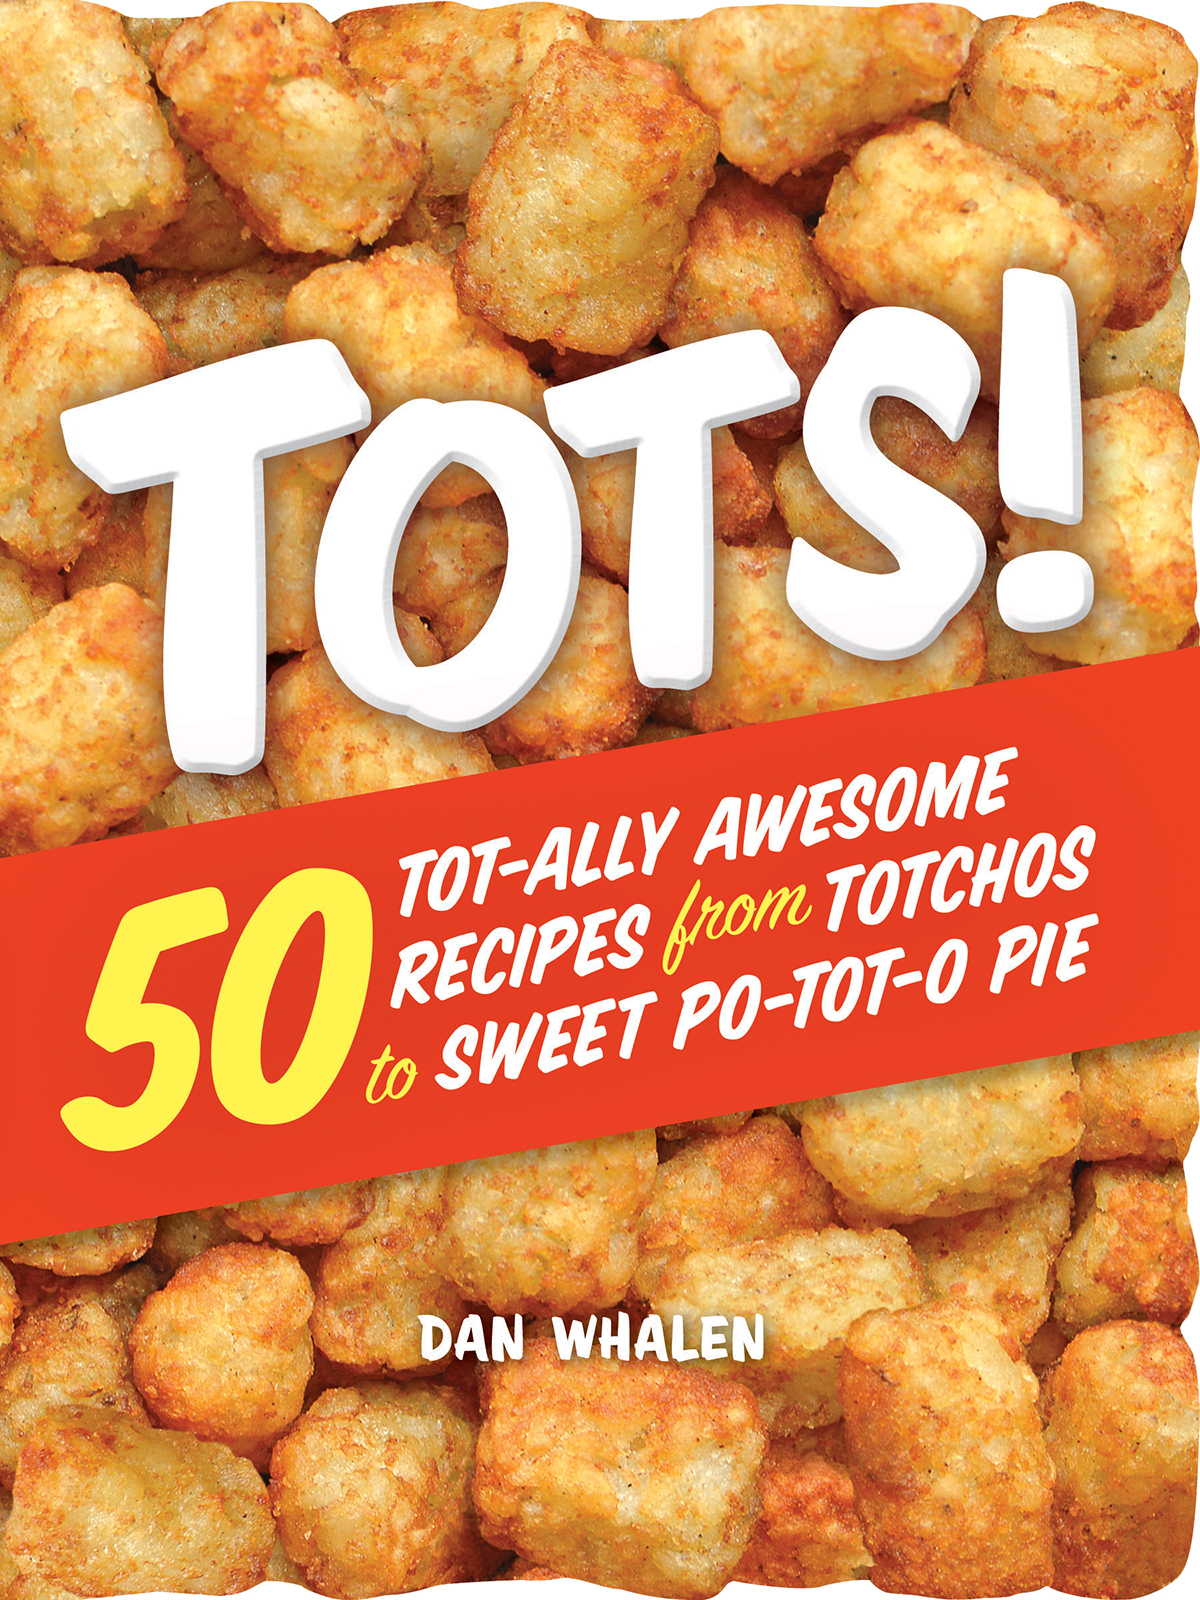 tots TOT-ALLY AWESOME RECIPES from Totchos to Sweet Po-tot-o Pie DAN WHALEN - photo 1